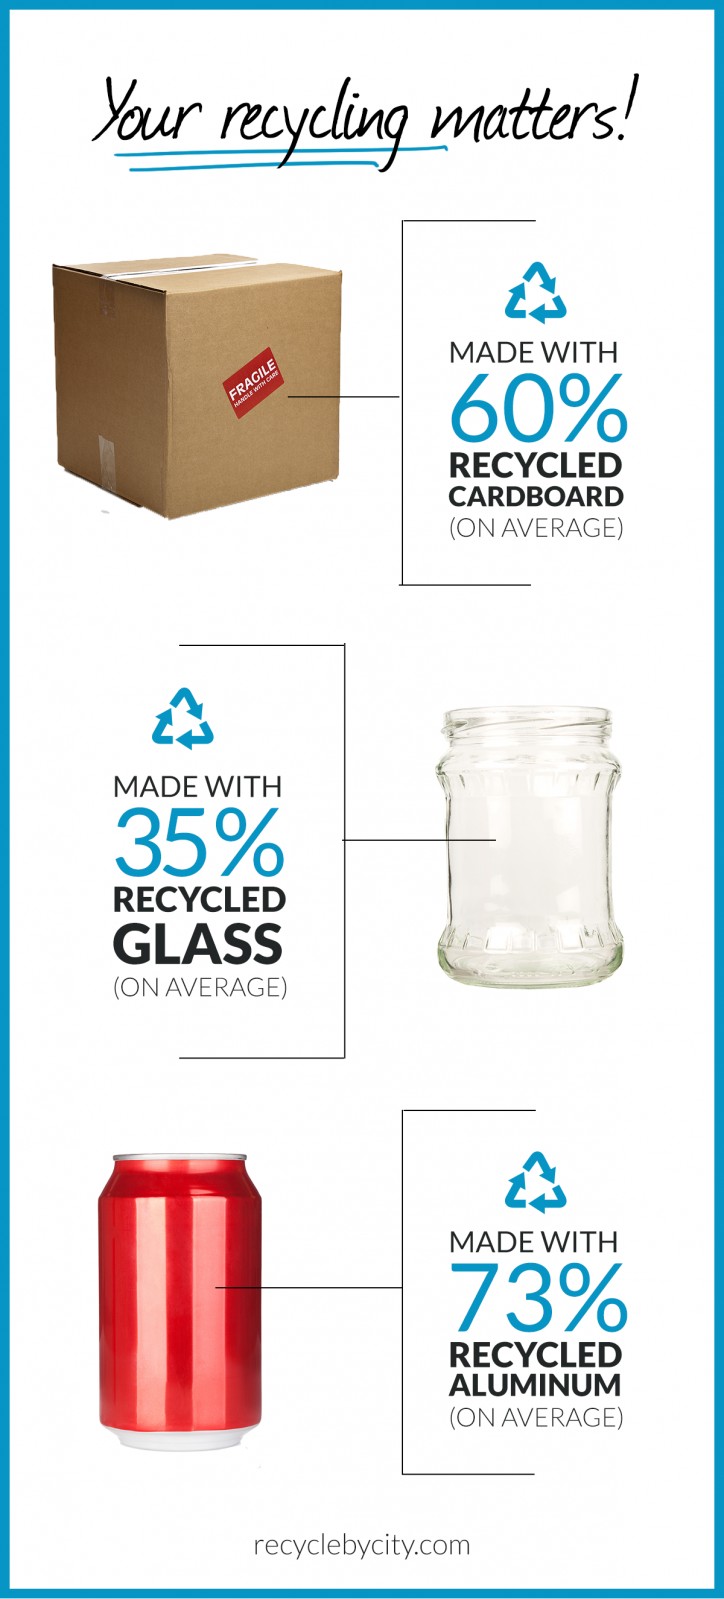 How does a glass bottle with some recycled content help the